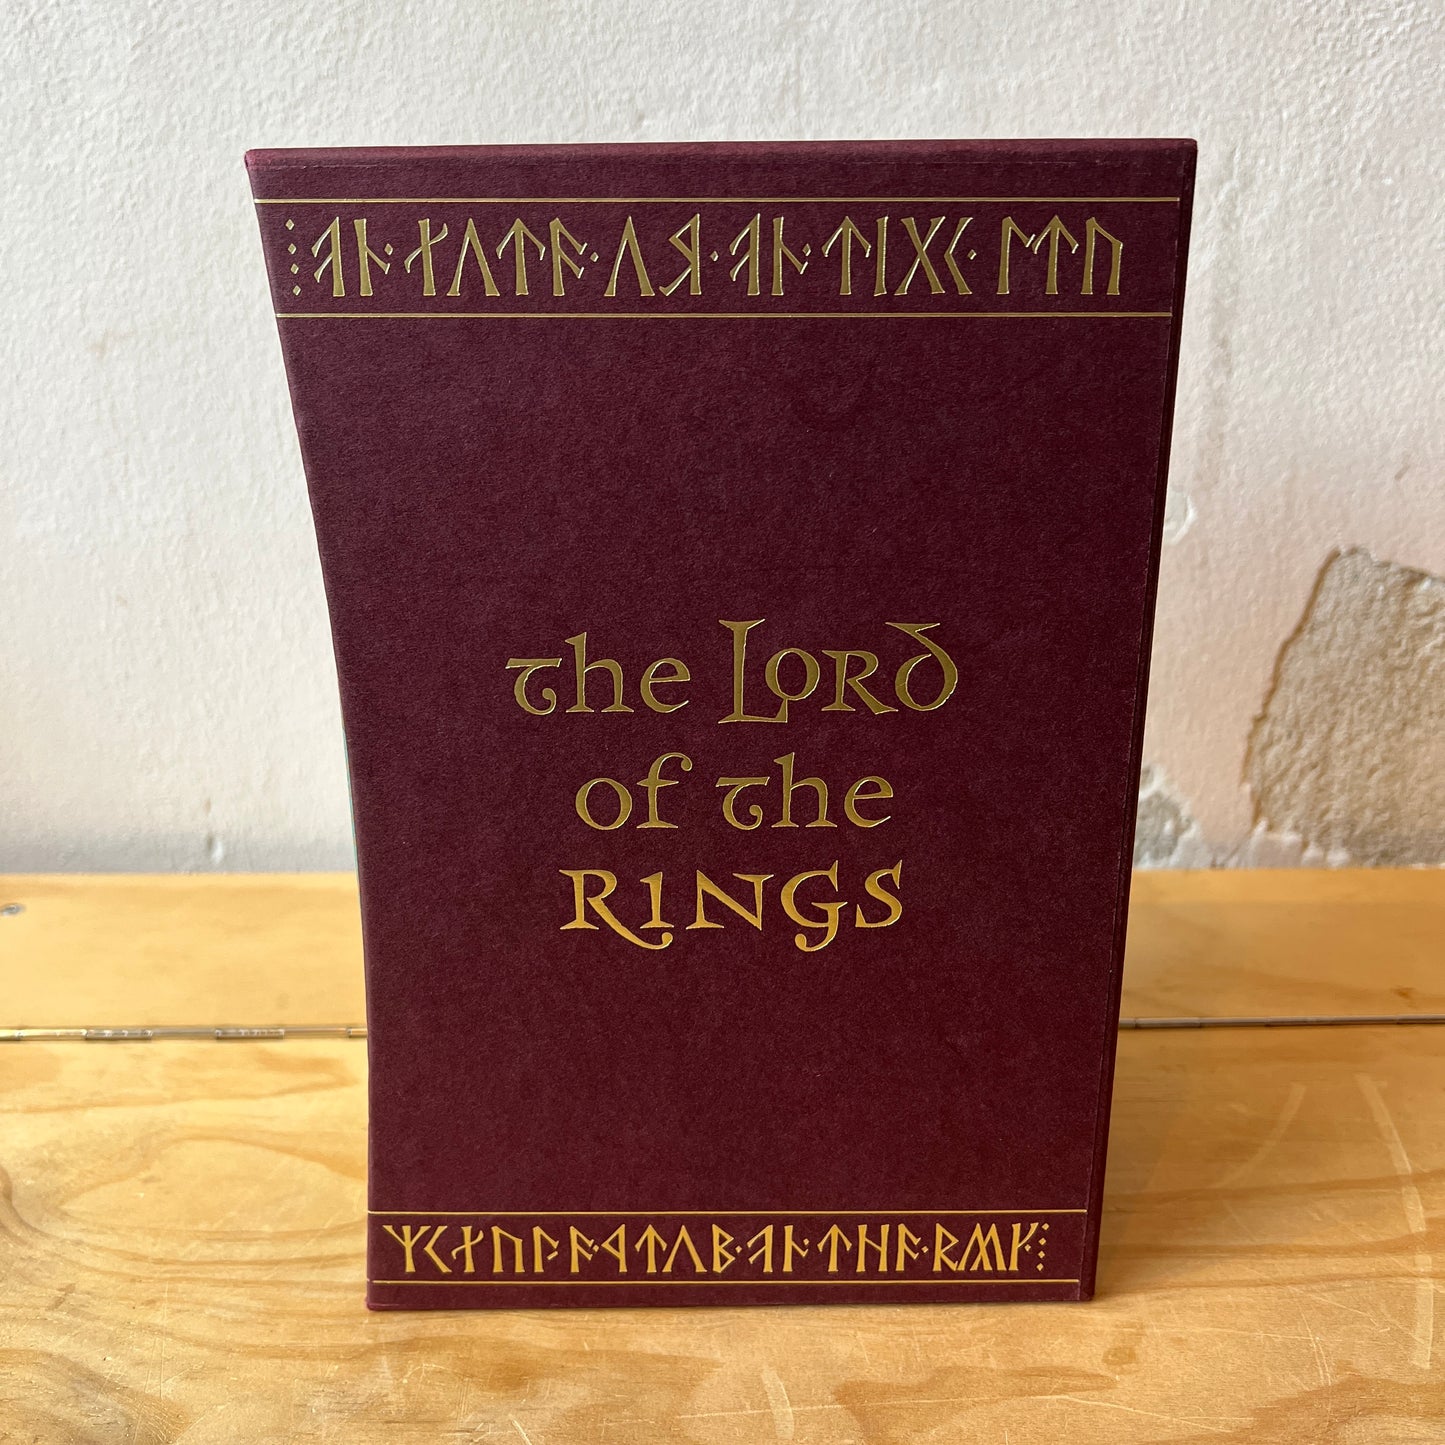 The Hobbit and Lord of the Rings set – J. R. R. Tolkien